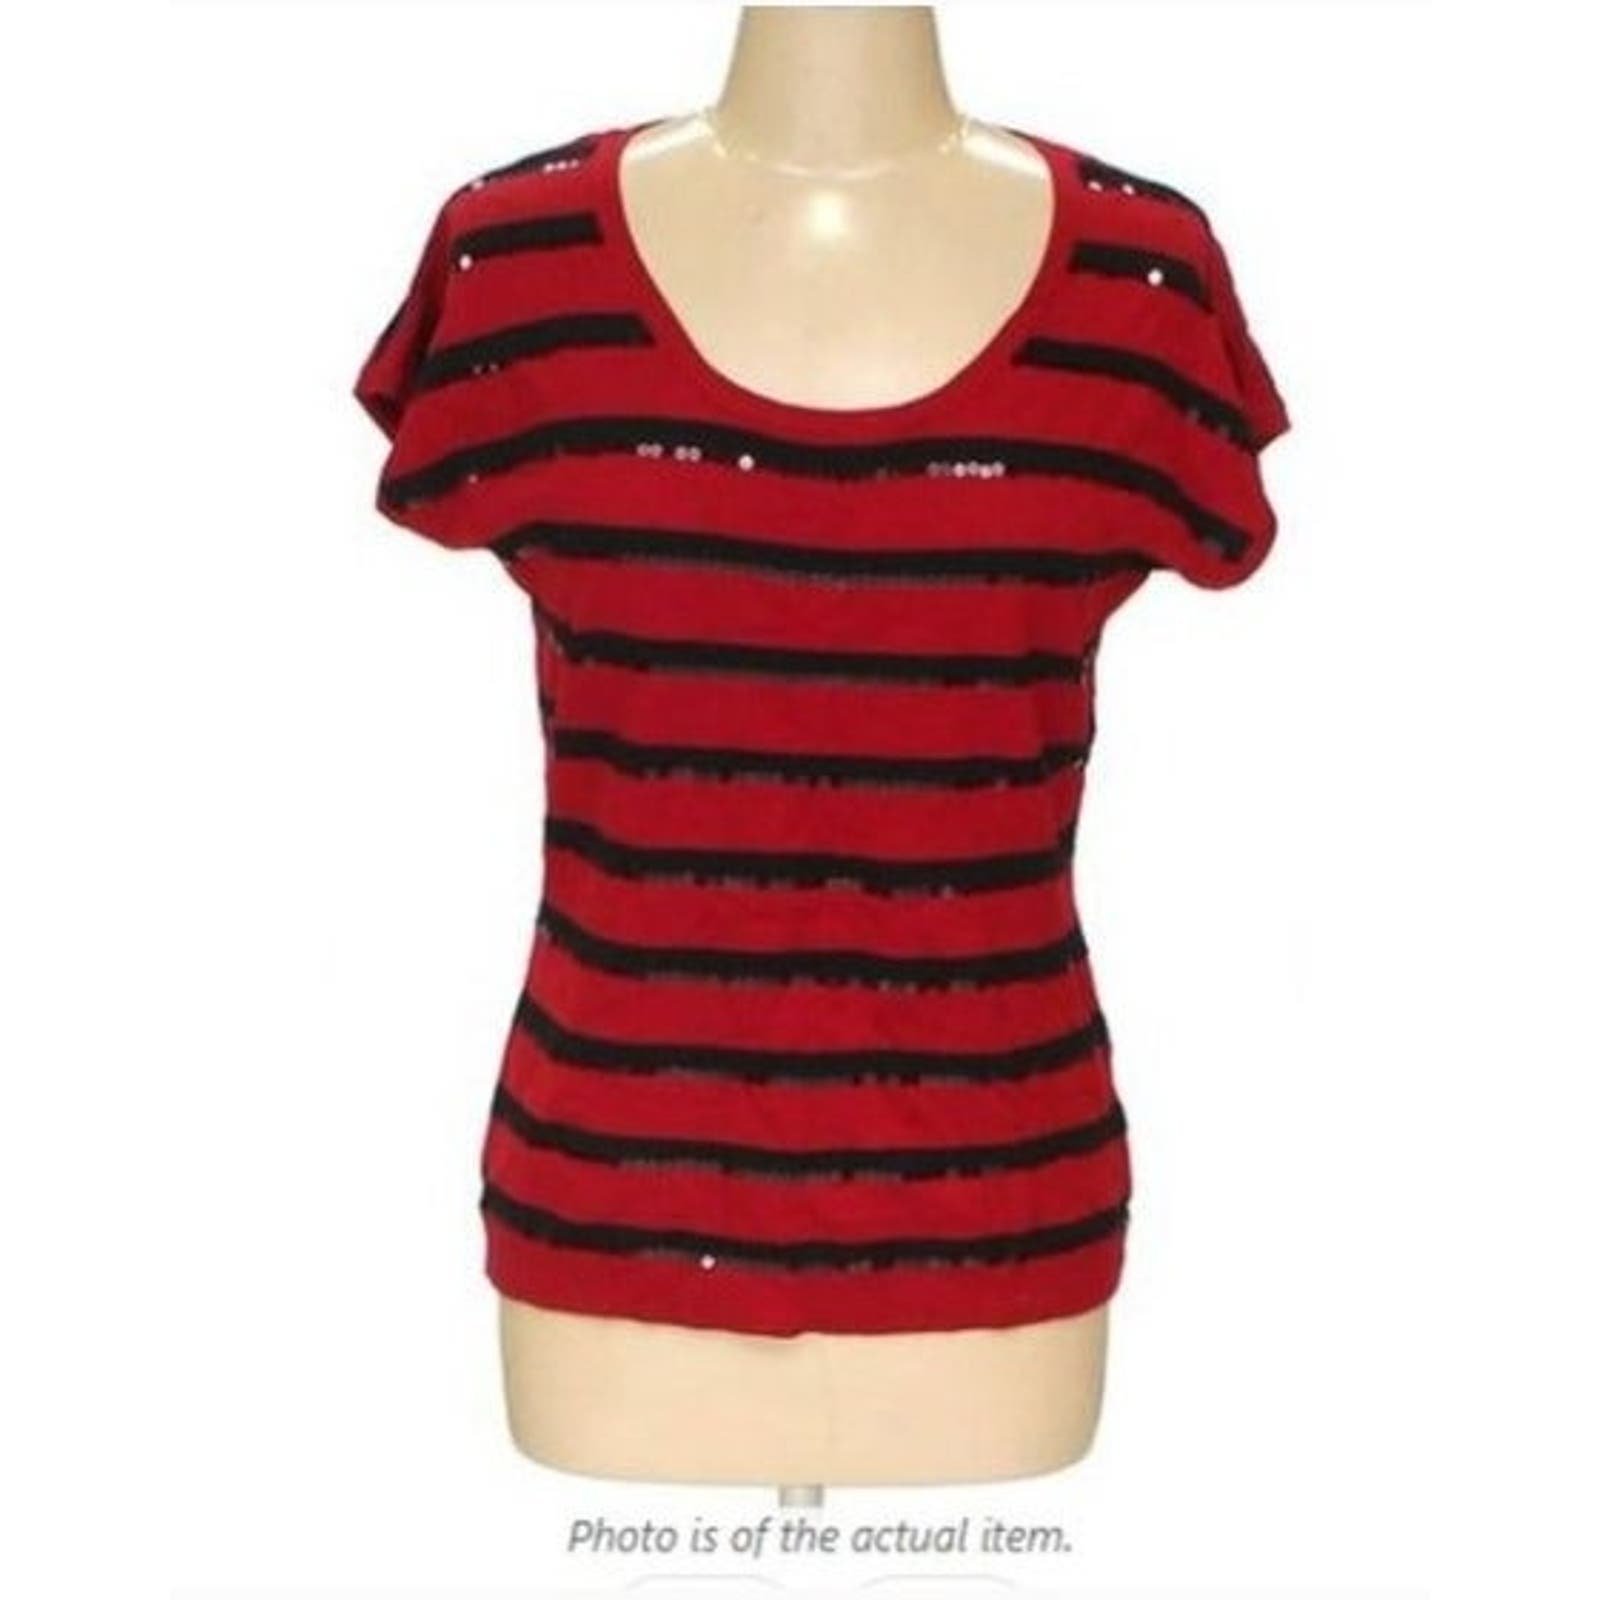 where to buy  REd and Black stripe Lark Lane Sweater size Medium hAxmQErz0 US Outlet